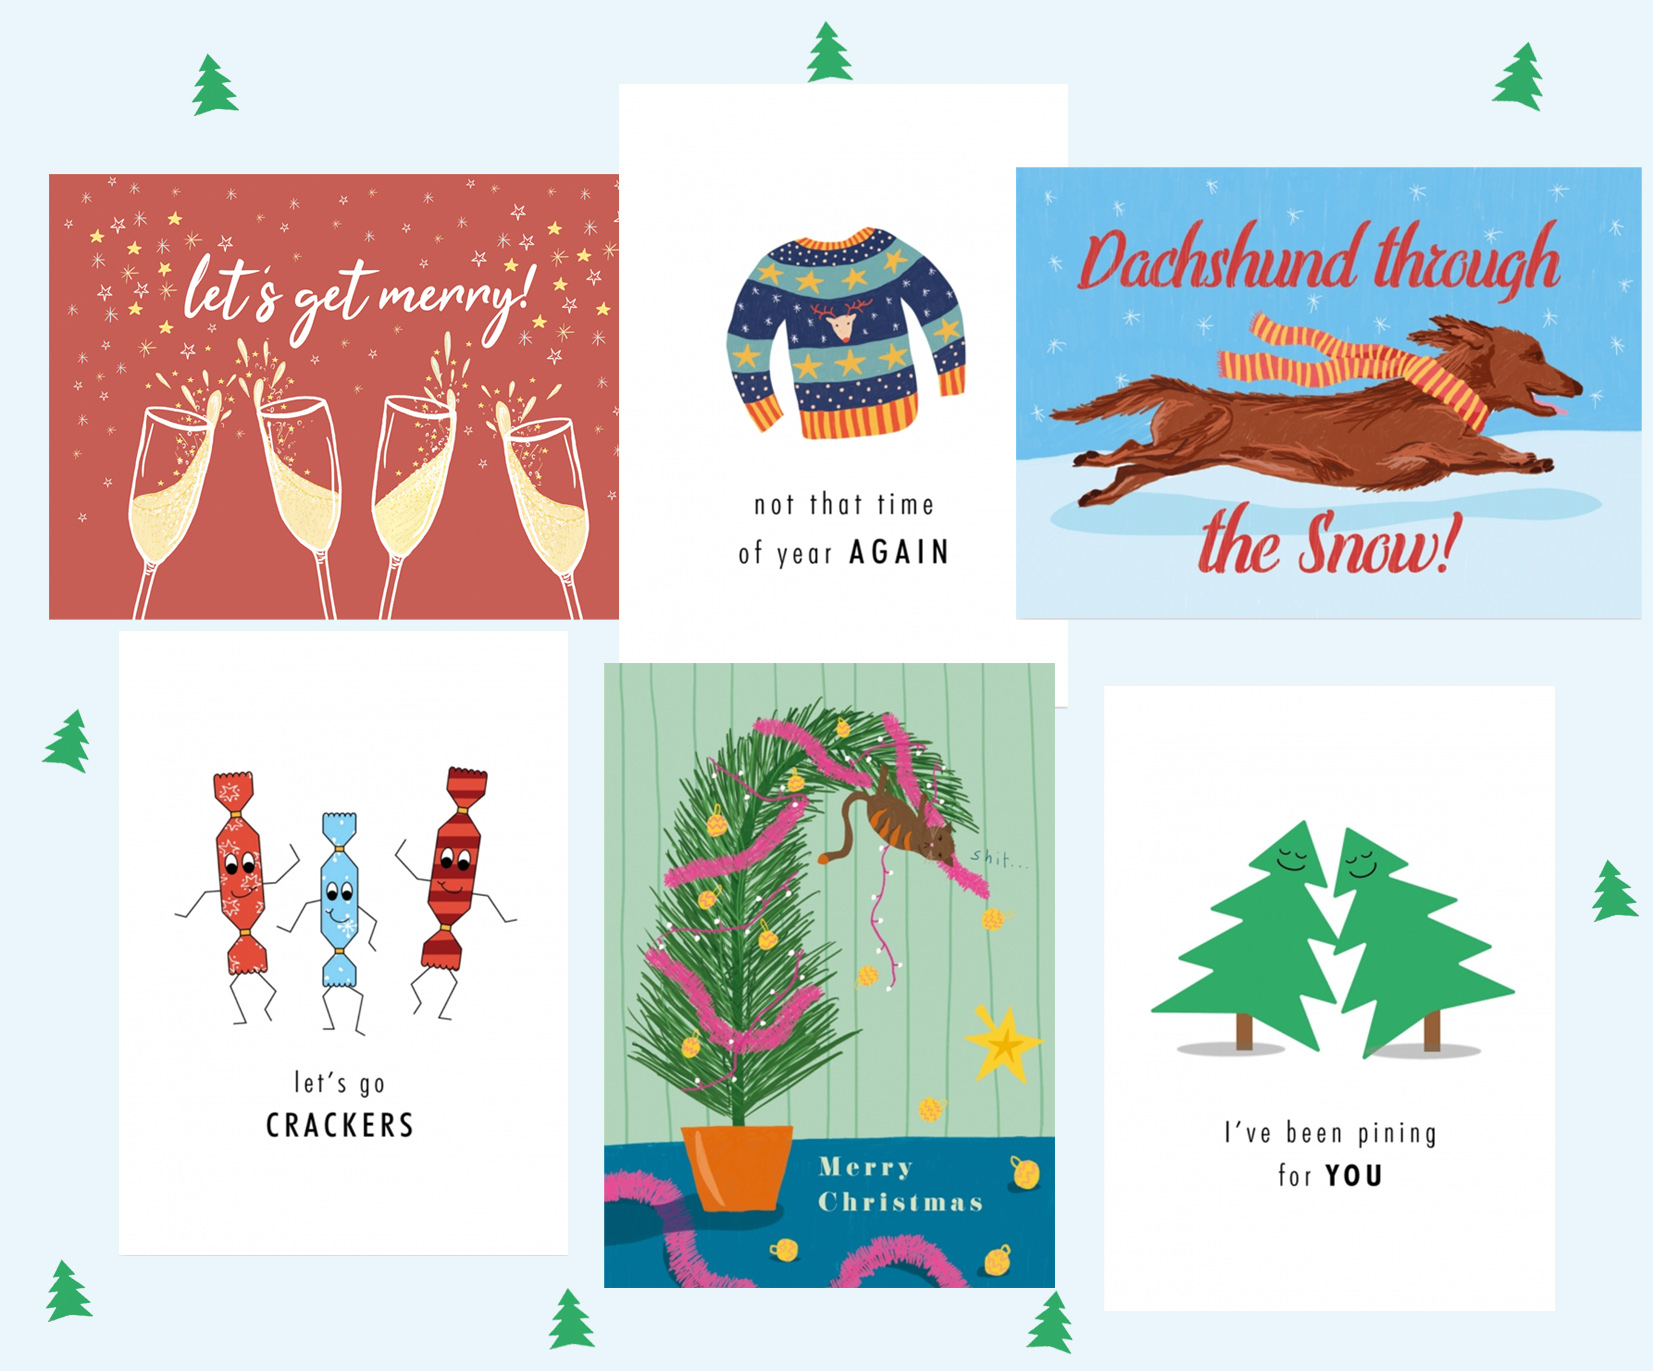 A Selection of Bookblock's Humorous Christmas Cards